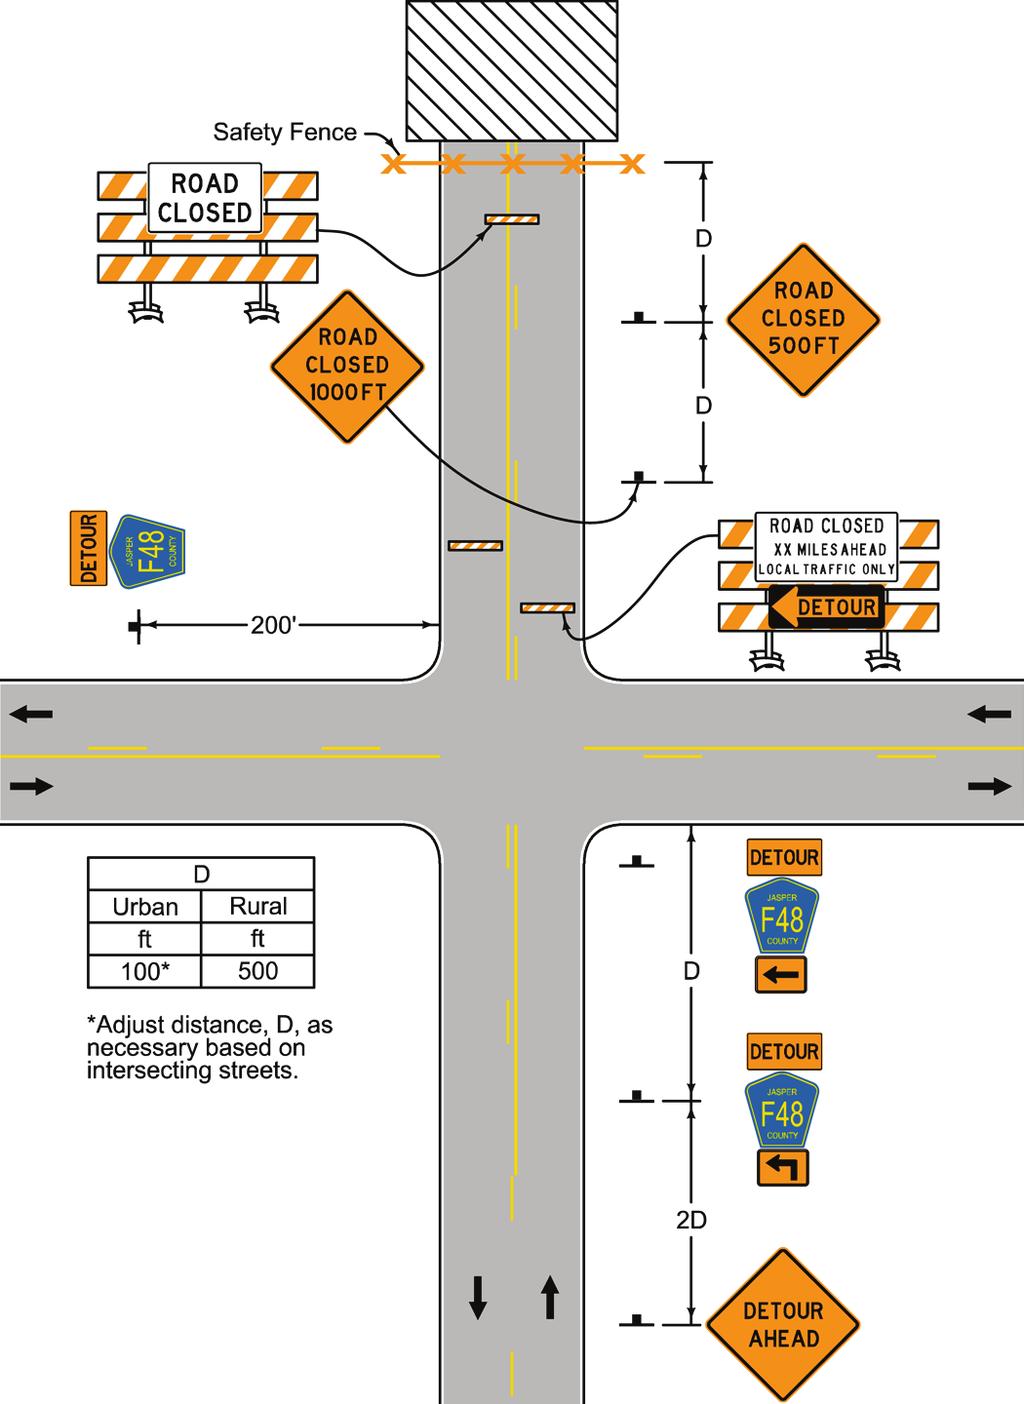 14. STREET OR ROAD CLOSURE WITH OFF-SITE DETOUR Existing traffic control devices should be modified as needed for the duration of the detour.